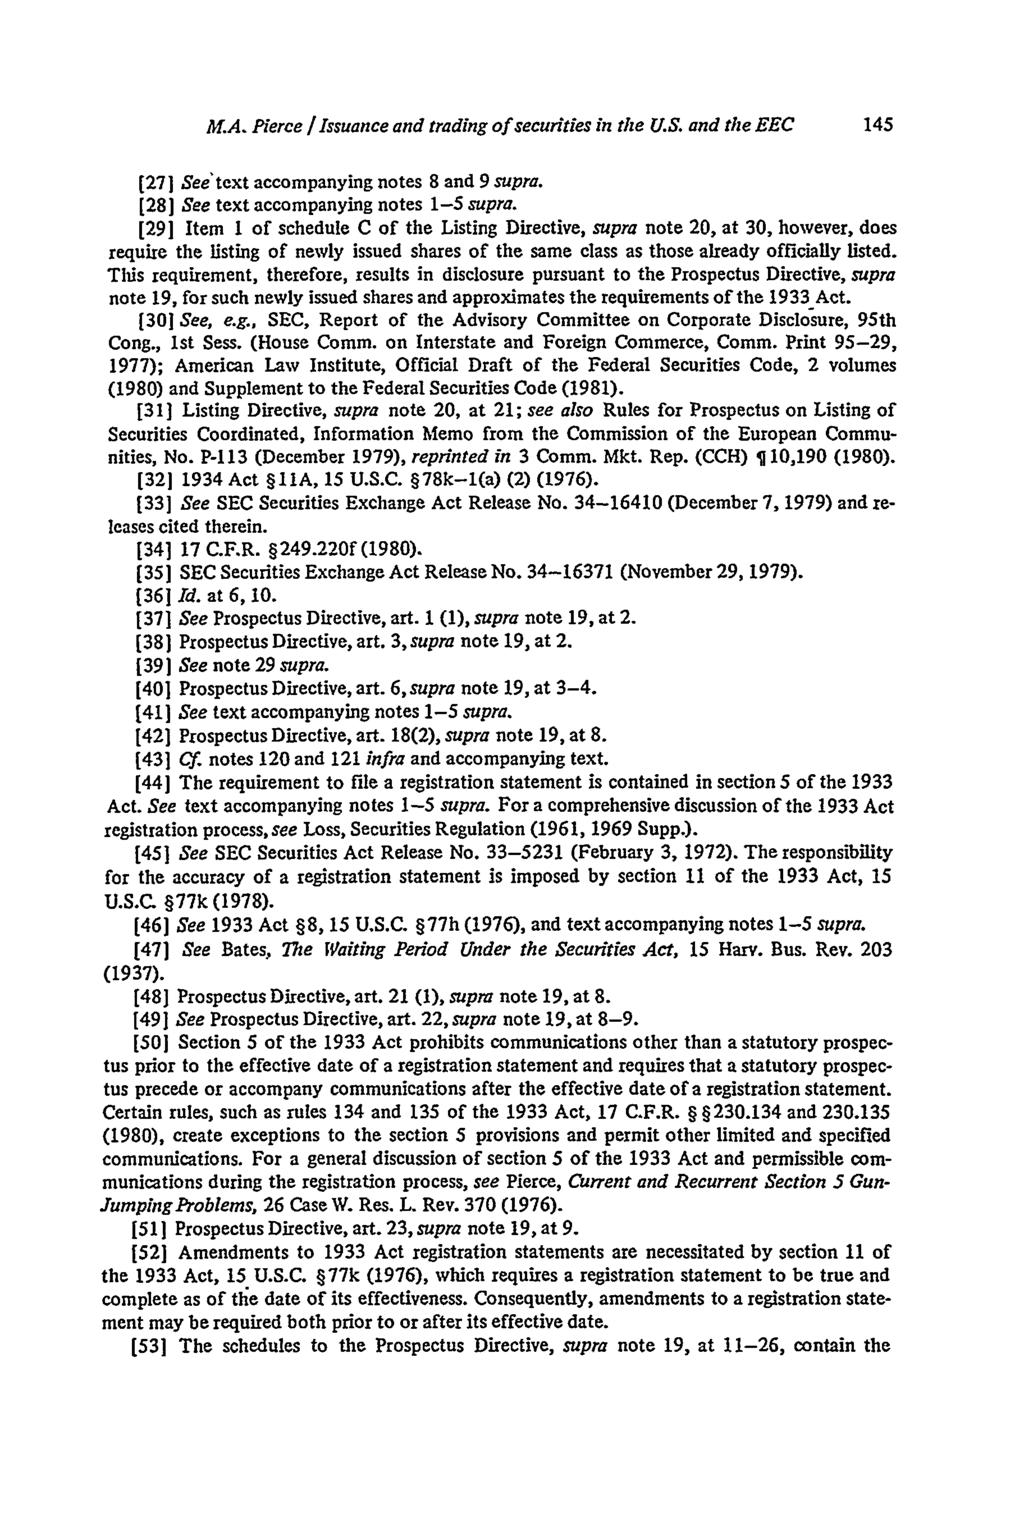 Pierce: The Regulation of the Issuance and Trading of Securities in the U M.A. Pierce / Issuance and trading of securities in the U.S. and the EEC (271 See'text accompanying notes 8 and 9 supra.